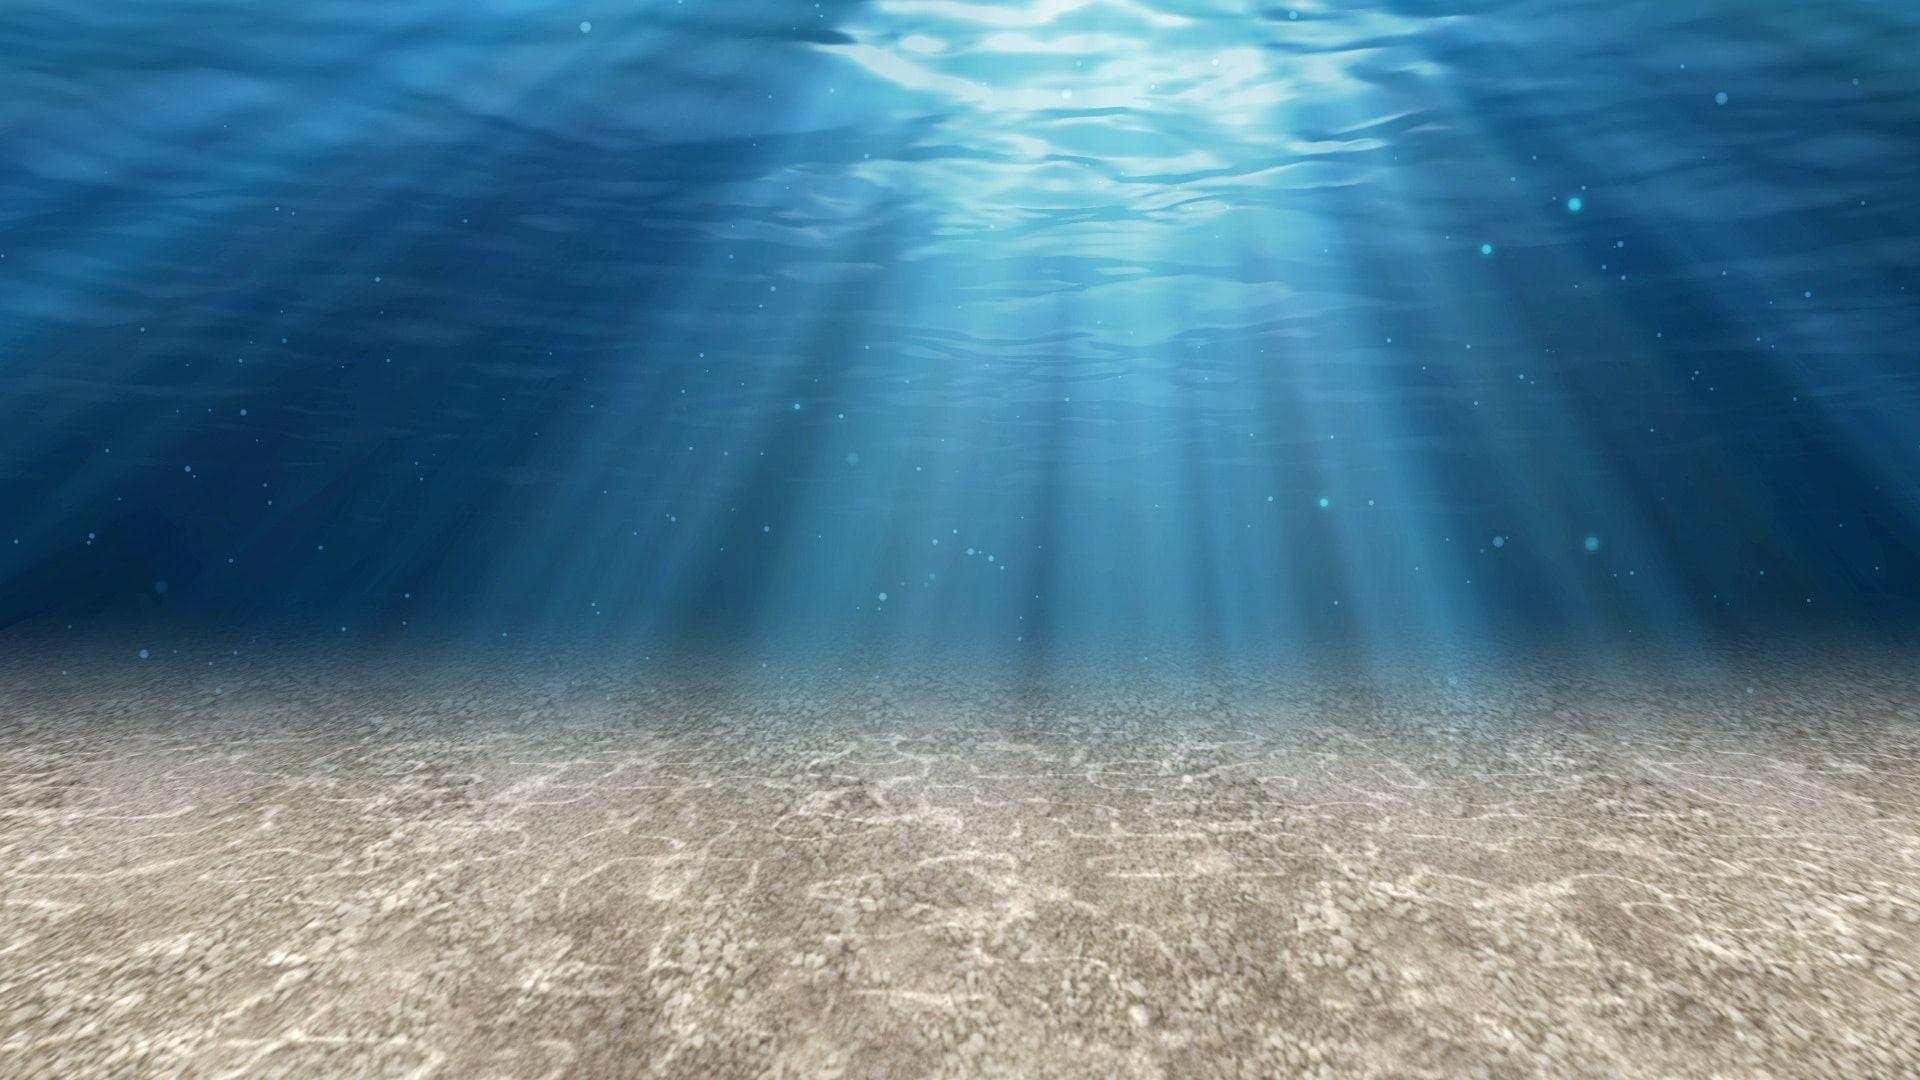 Moving Underwater Wallpapers - Top Free Moving Underwater Backgrounds